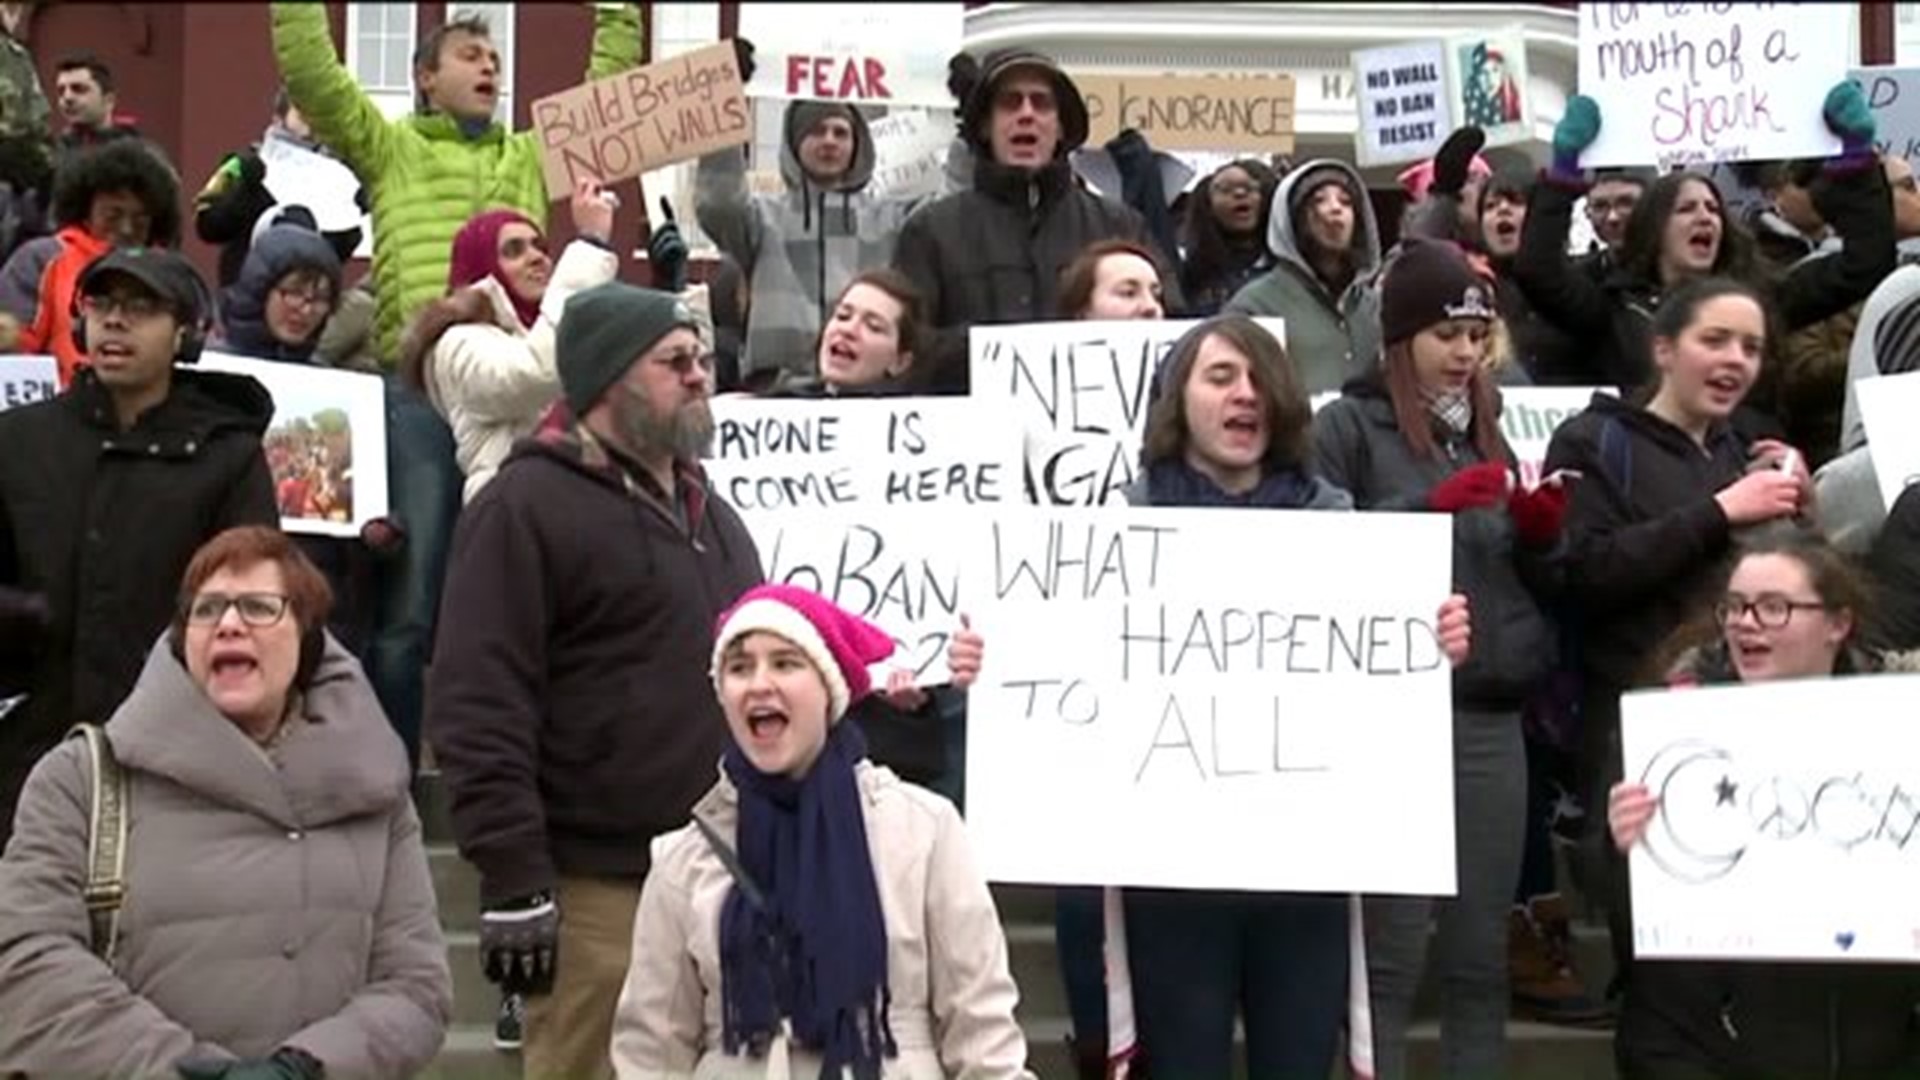 Immigration Ban Protest At Bloomsburg University Draws People From Both Sides